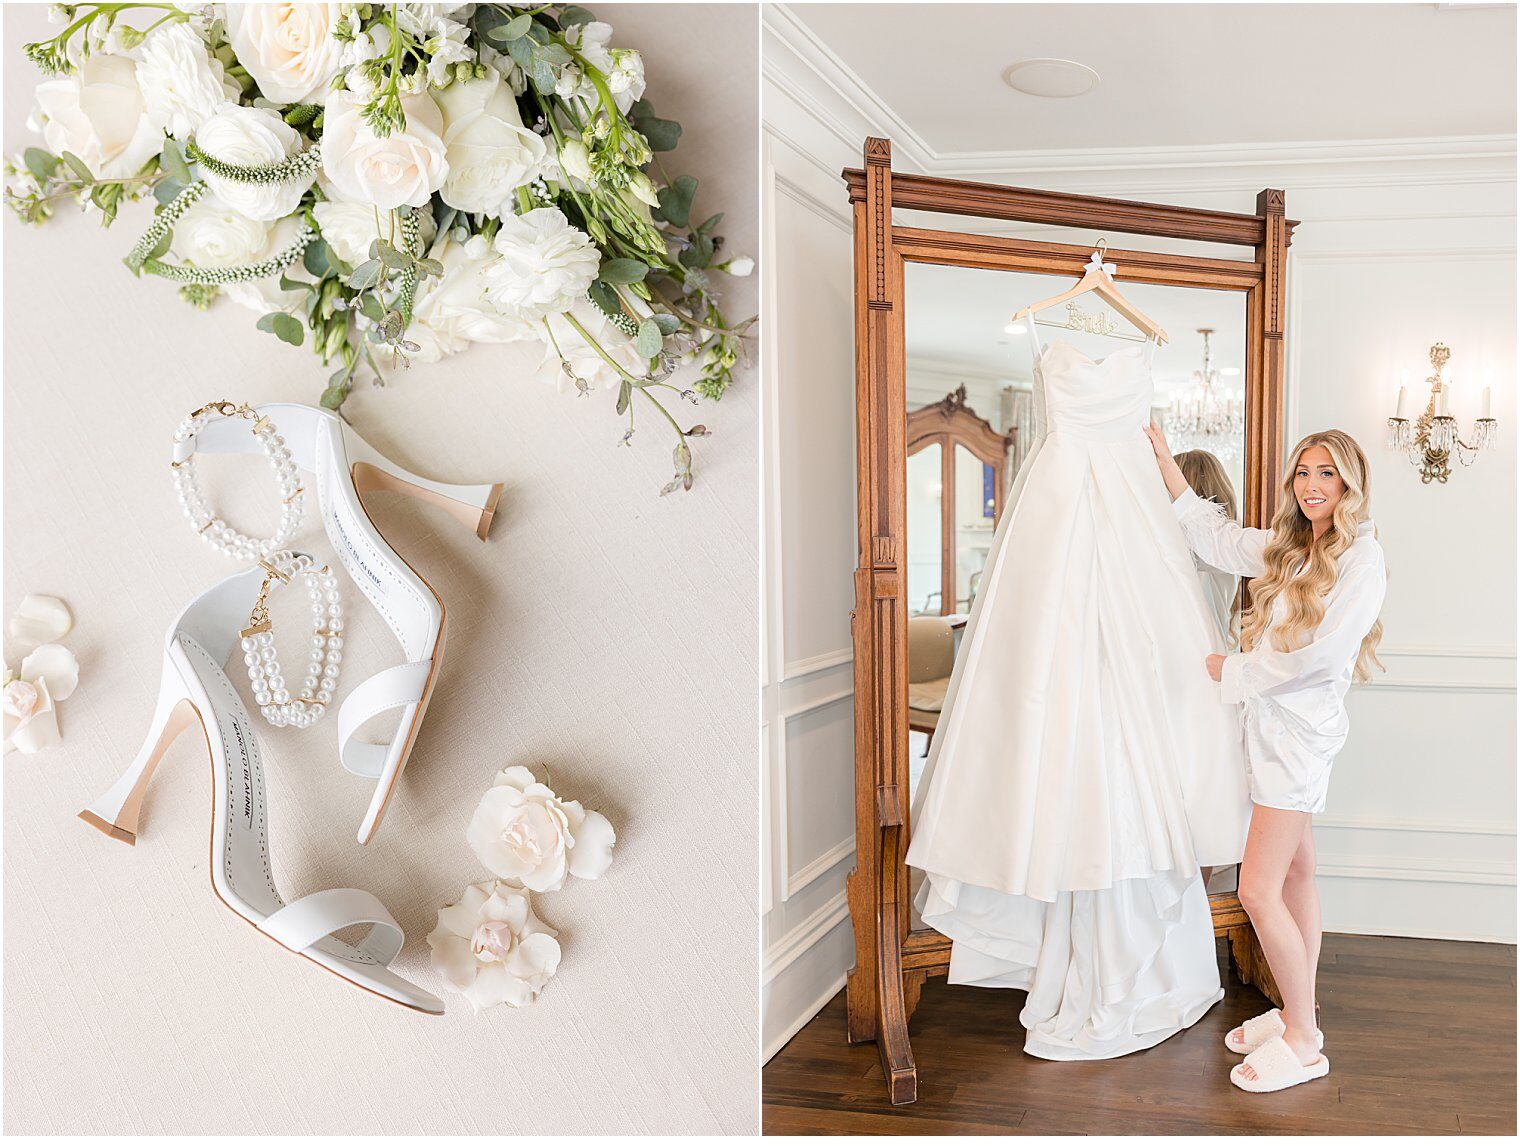 Bride with her beautiful wedding dress and details of her wedding shoes